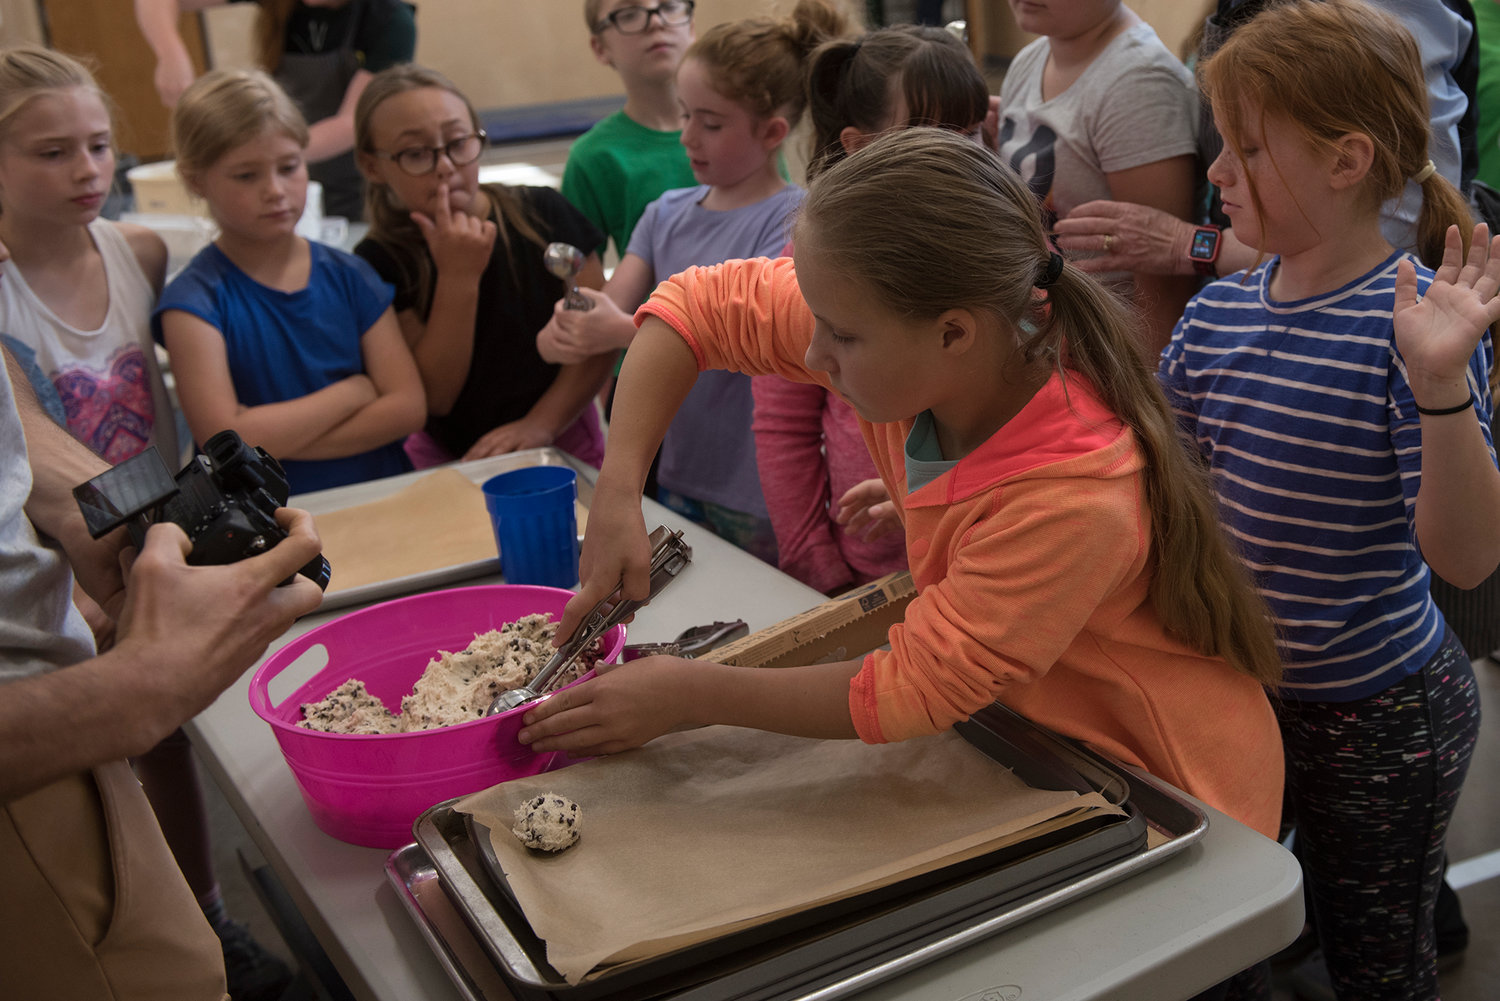 Kids line up at the Boys &amp; Girls Club of Chehalis to scoop cookie dough onto a baking sheet on Tuesday, June 25, 2019.